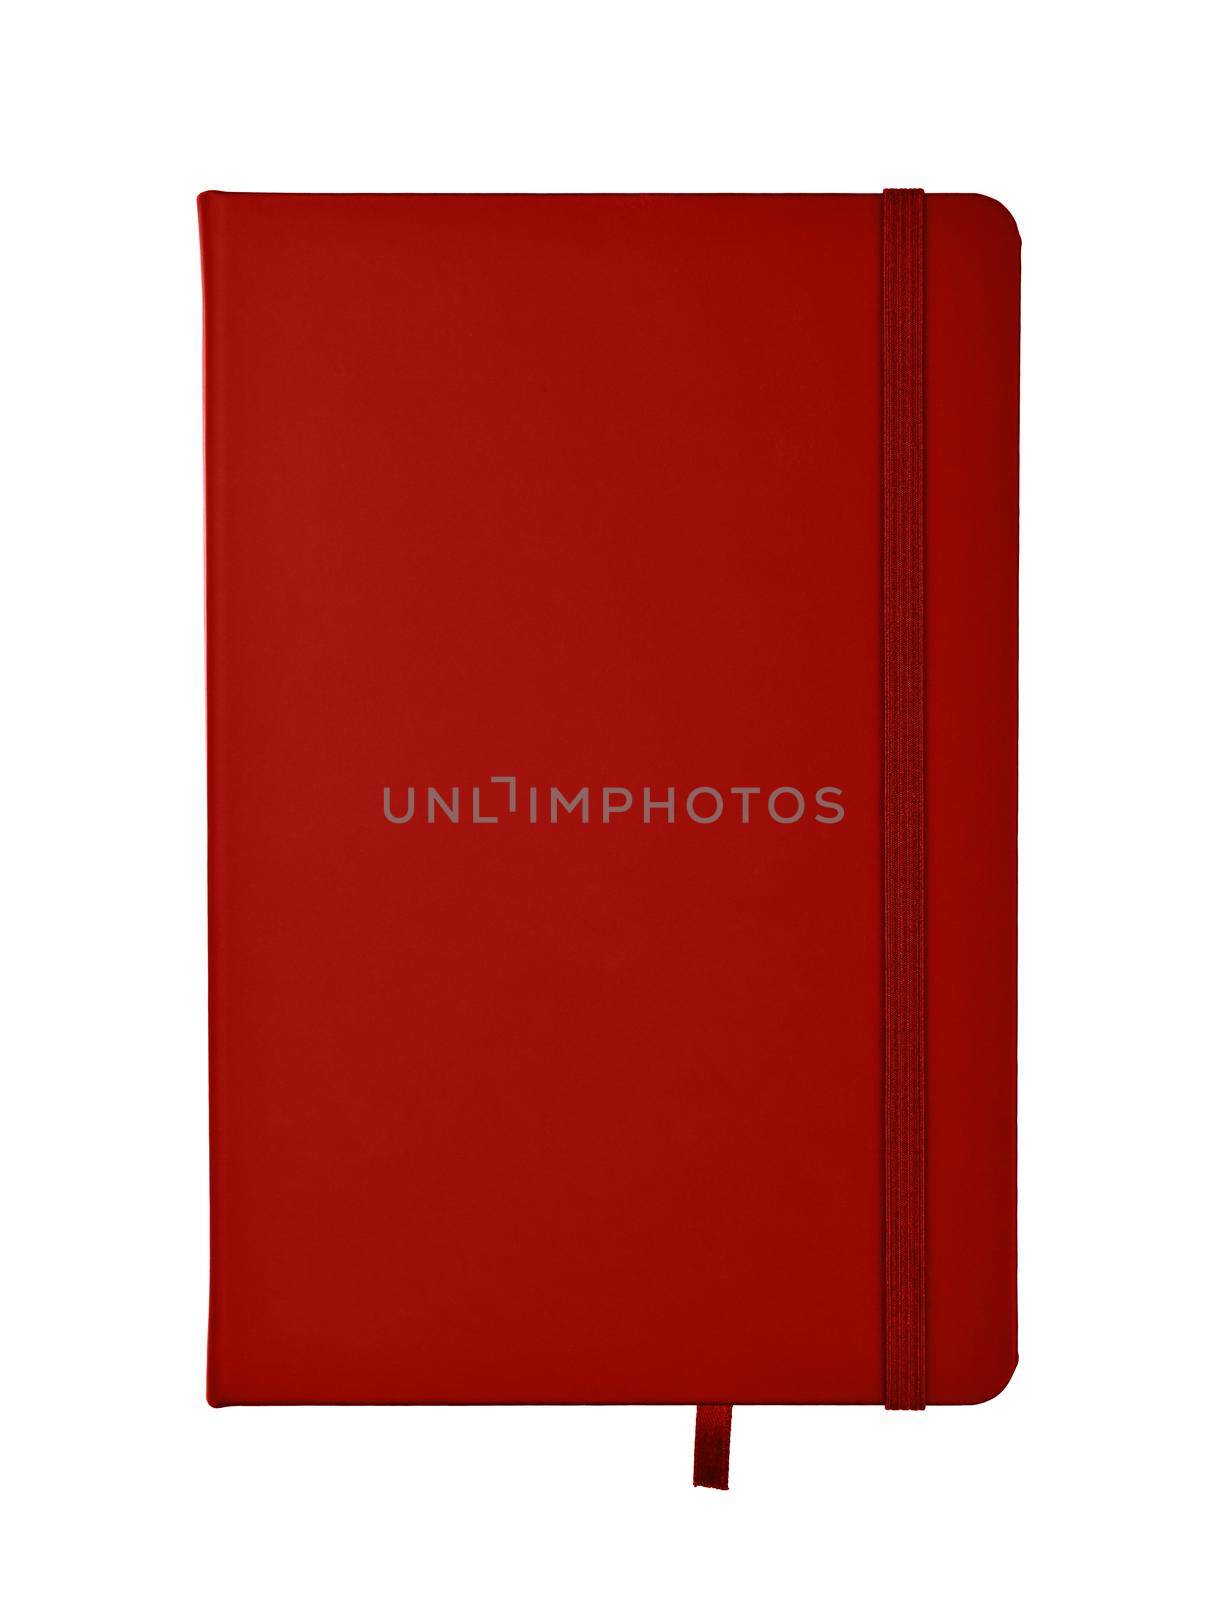 Red leather cover notebook isolated on white by BreakingTheWalls